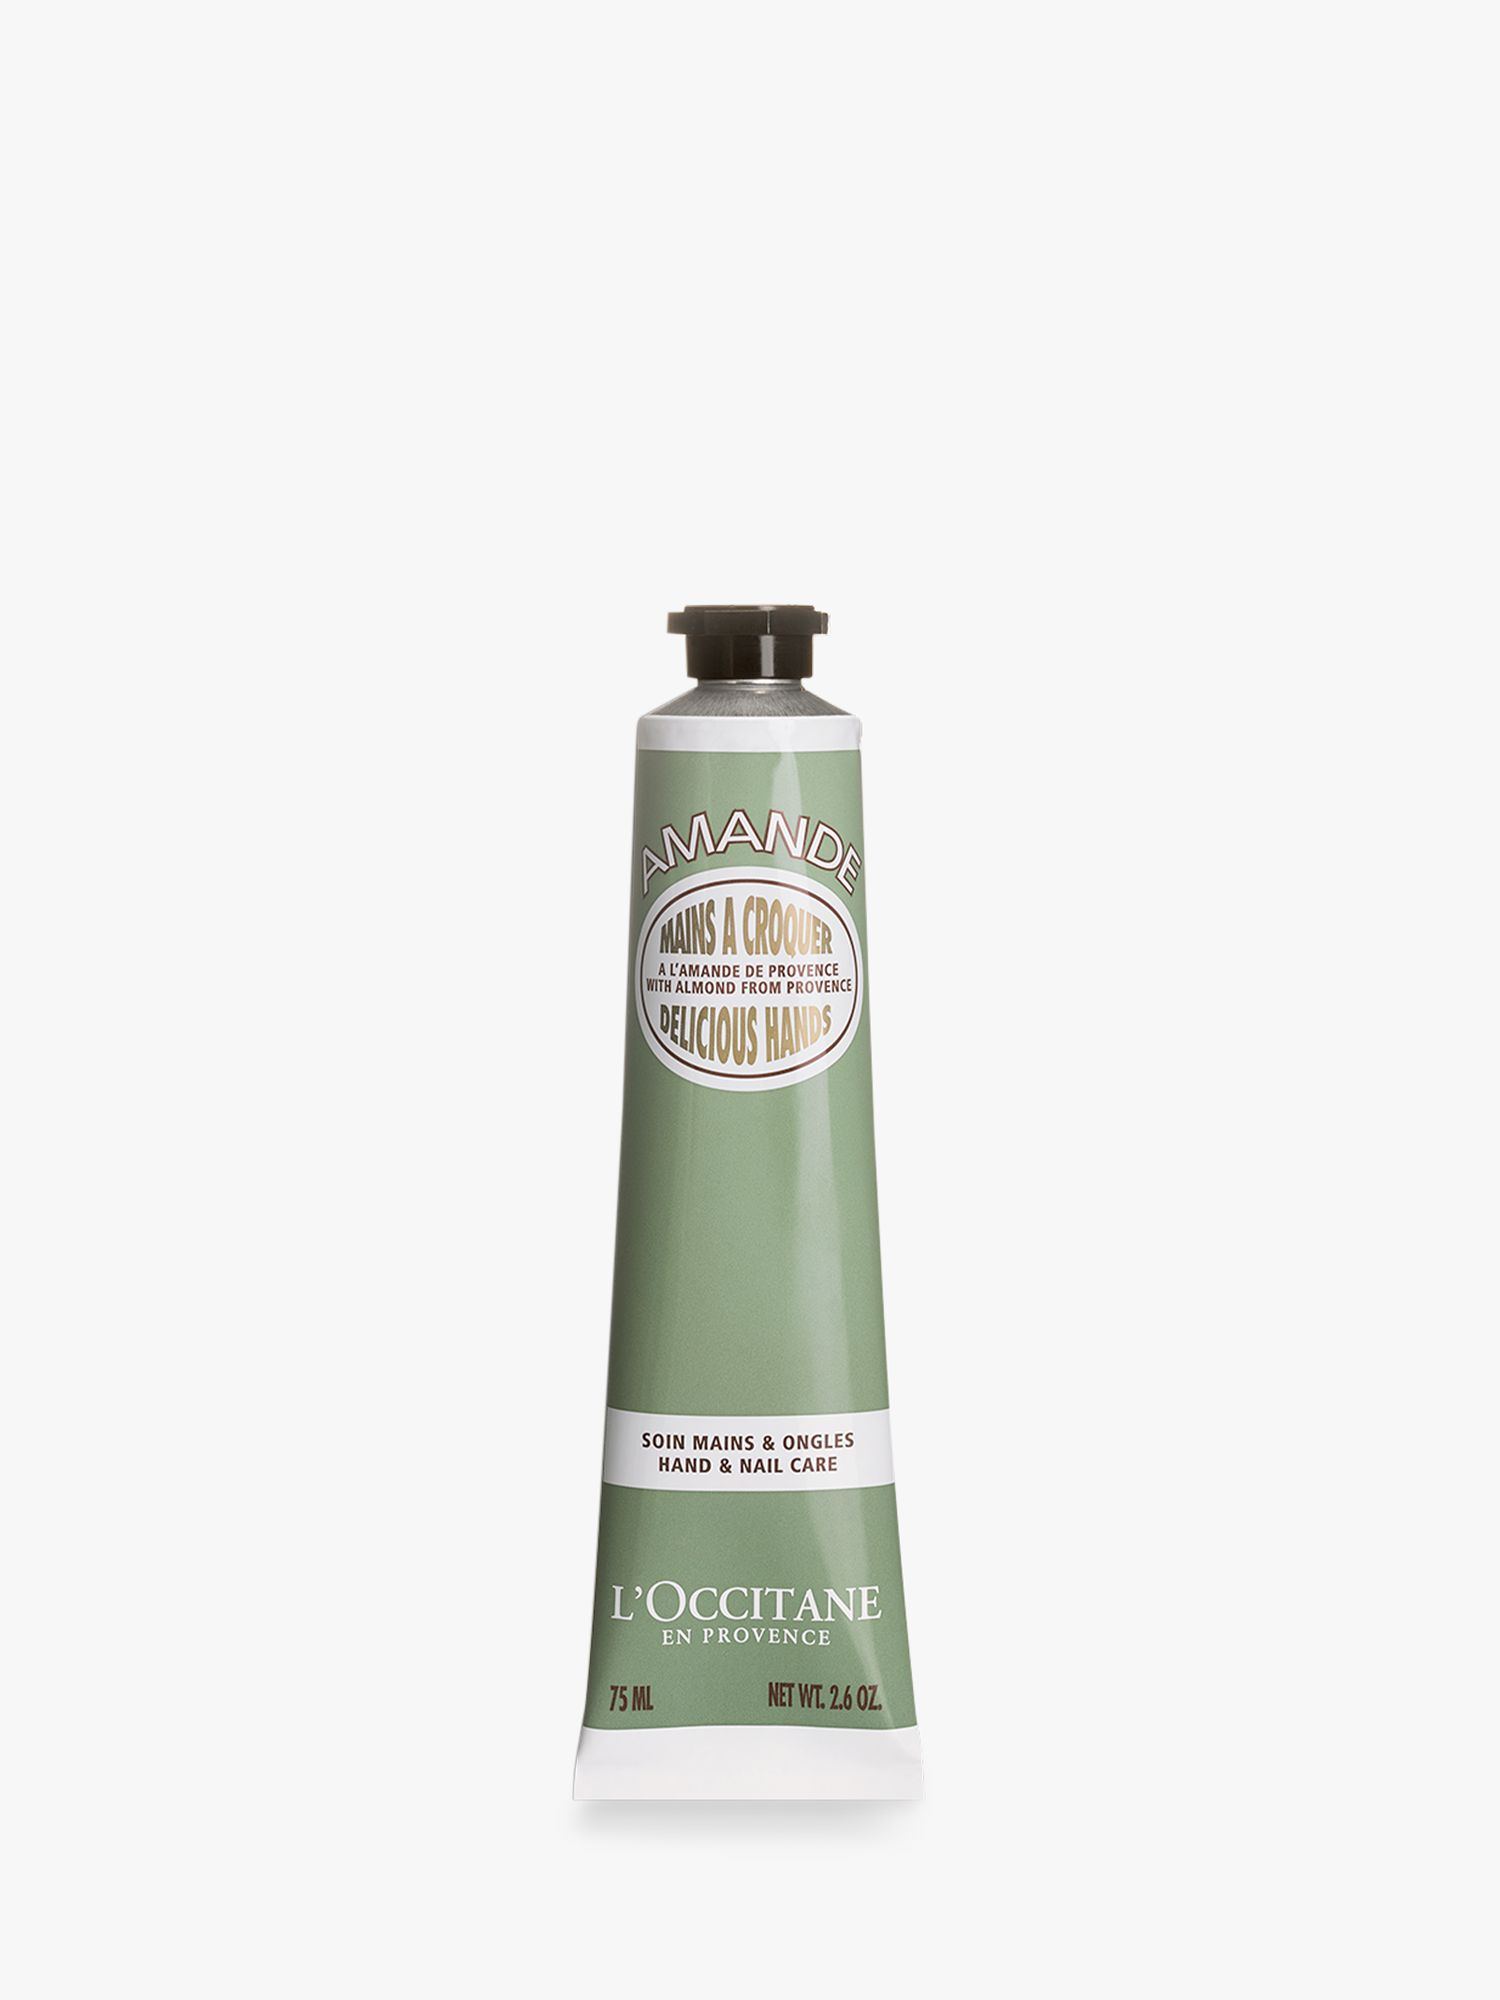 L'OCCITANE Almond Delicious Hands Hand & Nail Care, 75ml at John Lewis ...